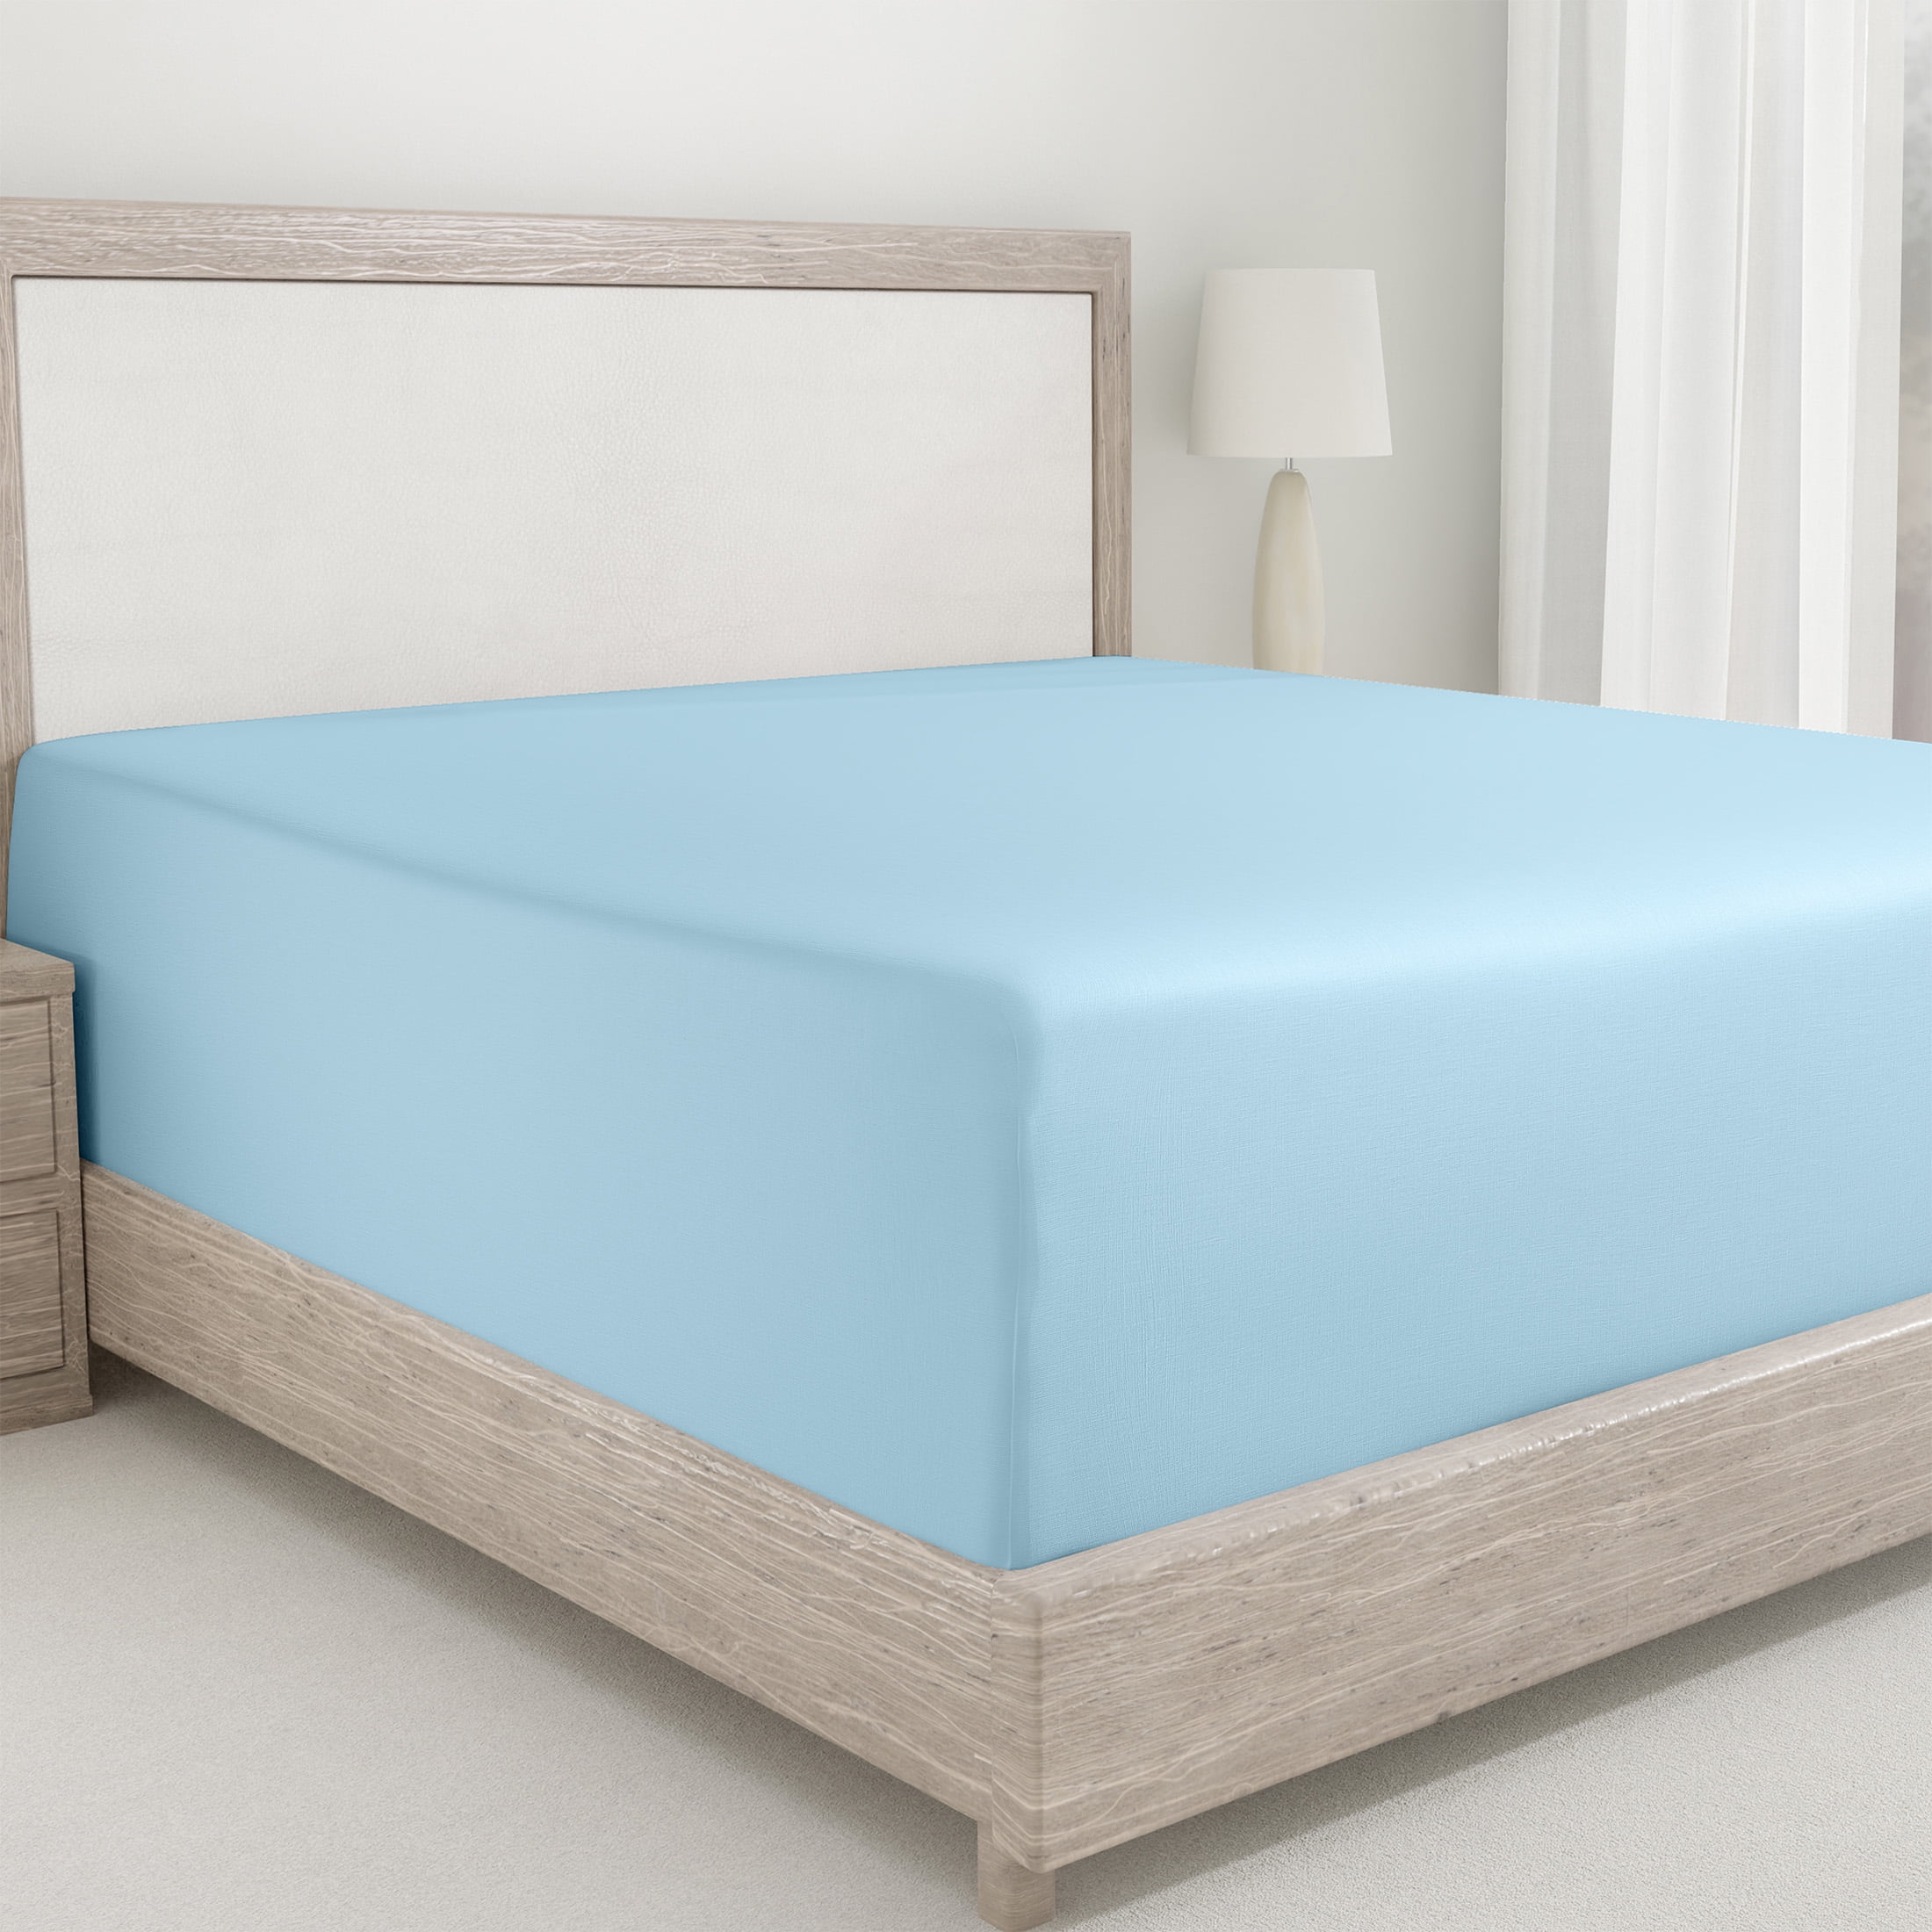 Best Fitted Sheet That Stays Tight: Sleep Tight Tonight! – California  Design Den